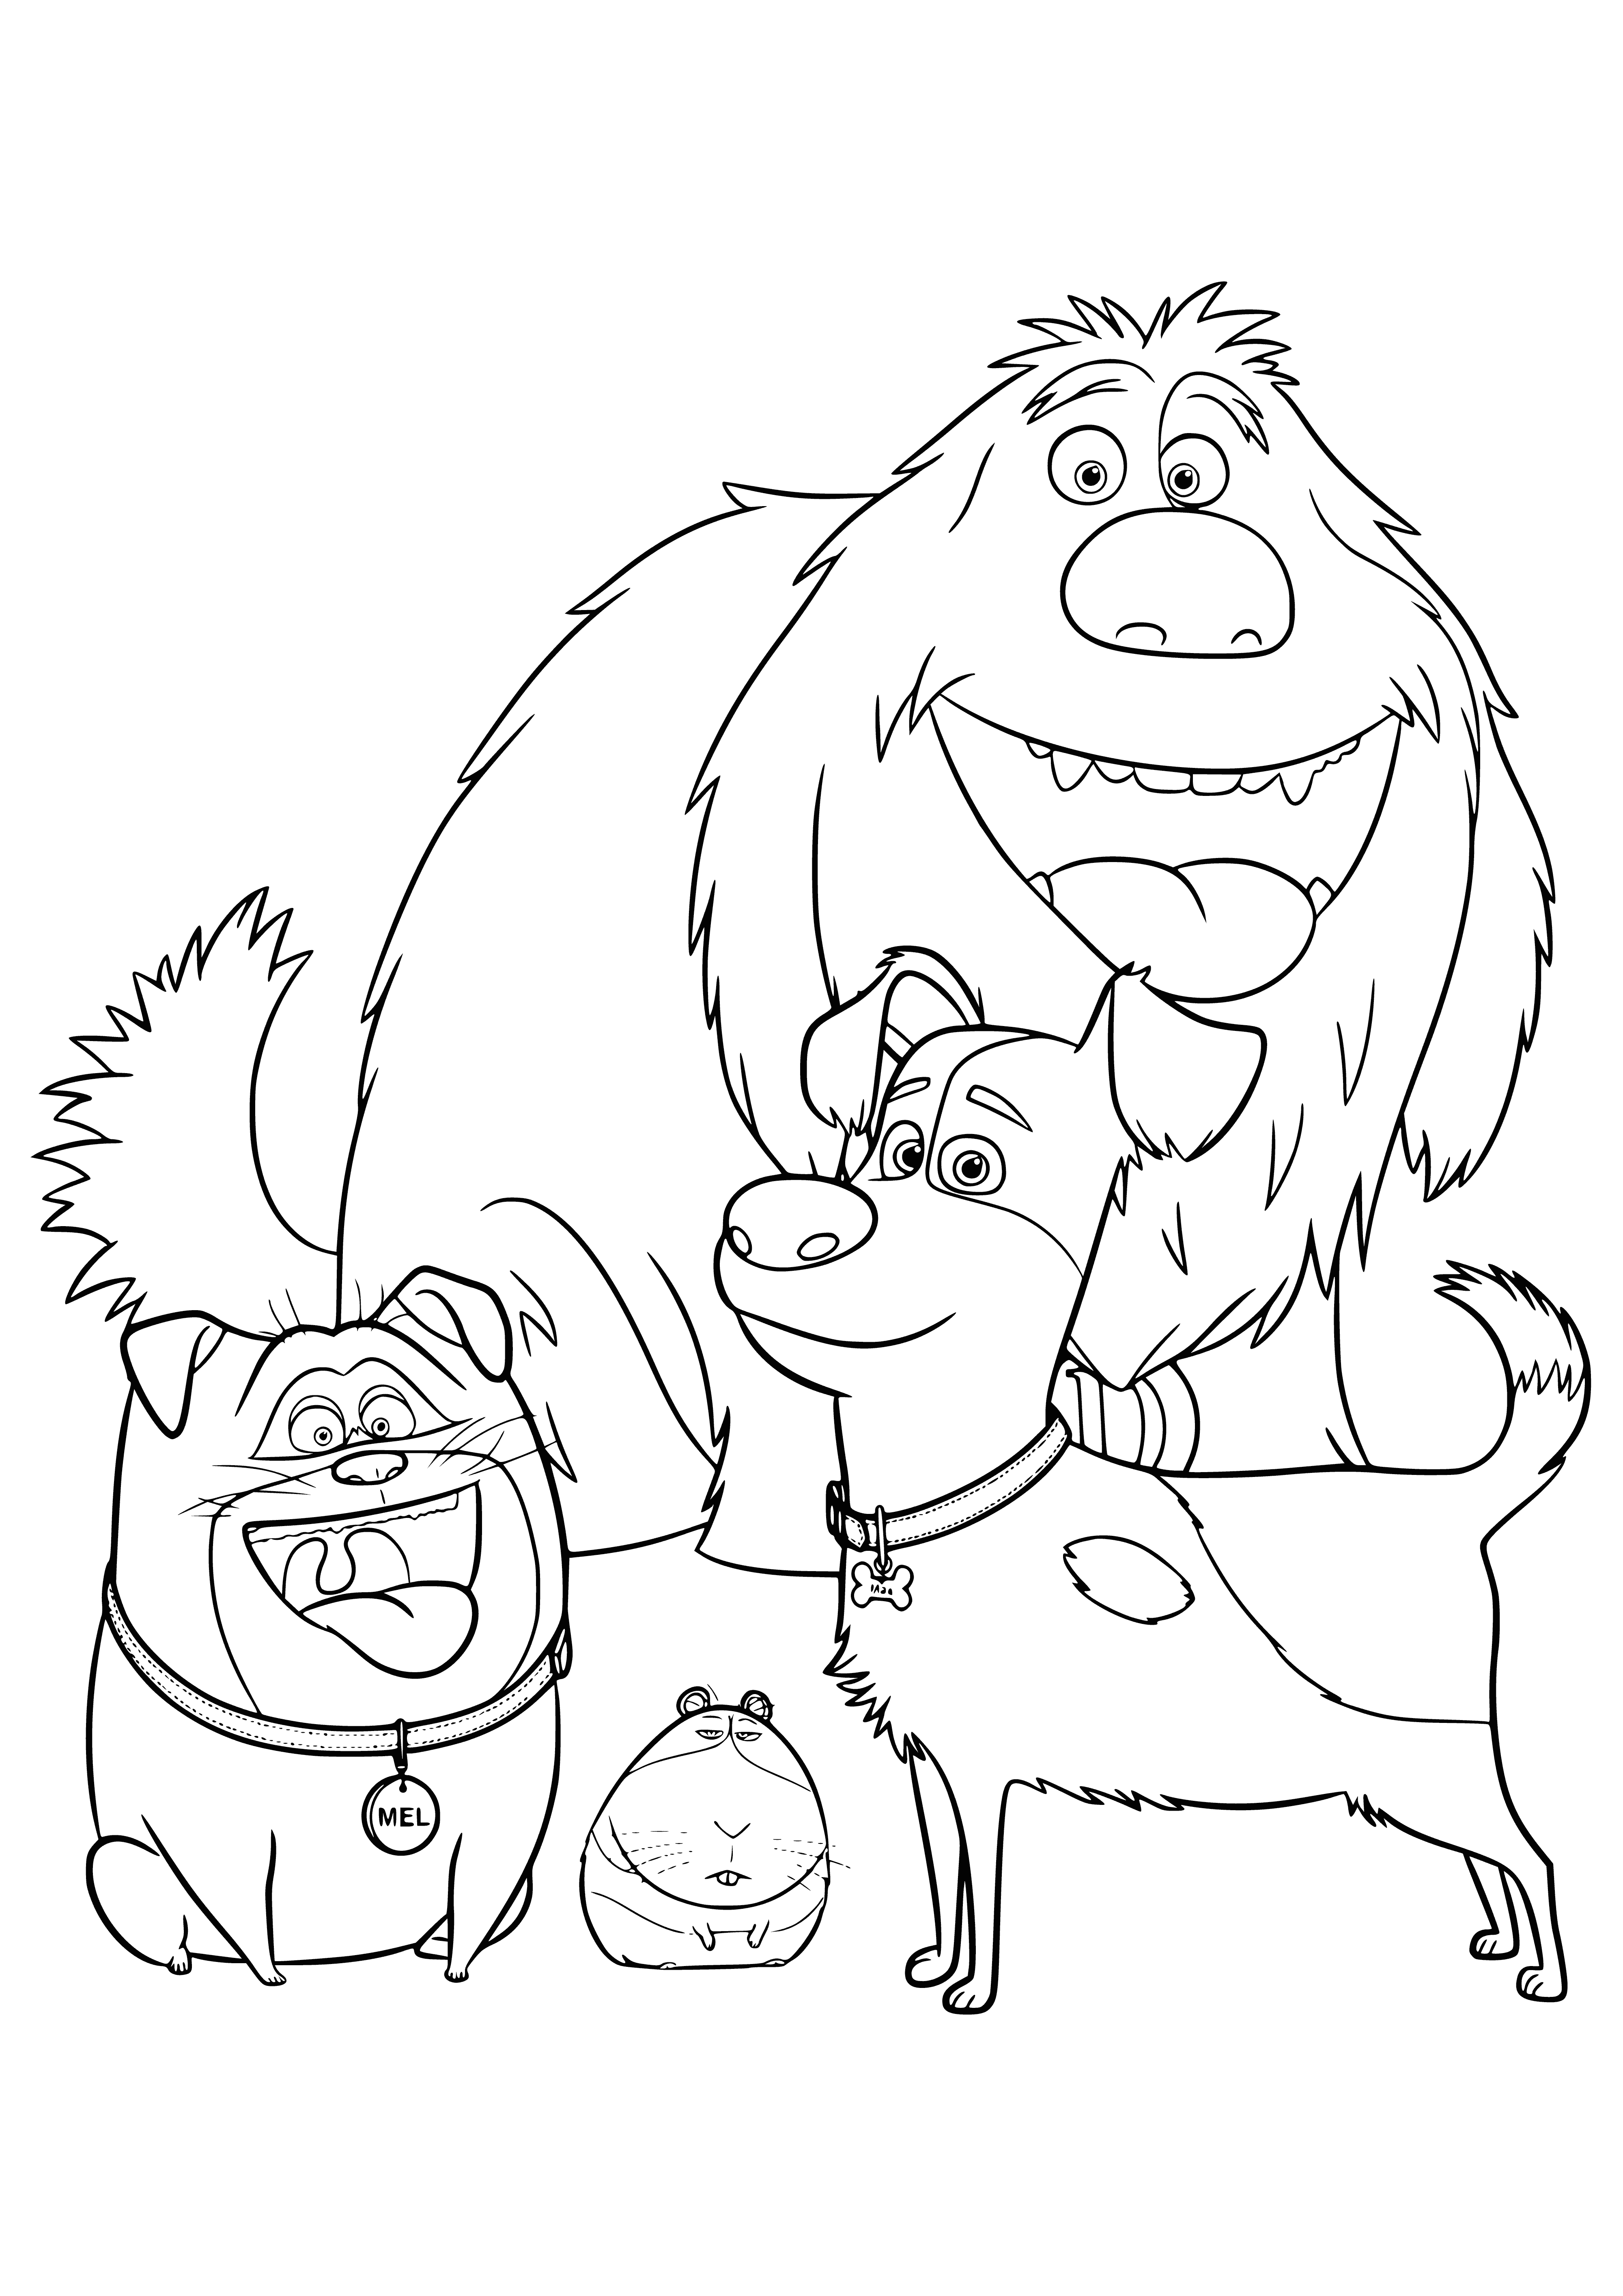 coloring page: A dog and cat peacefully together, enjoying food and a toy.